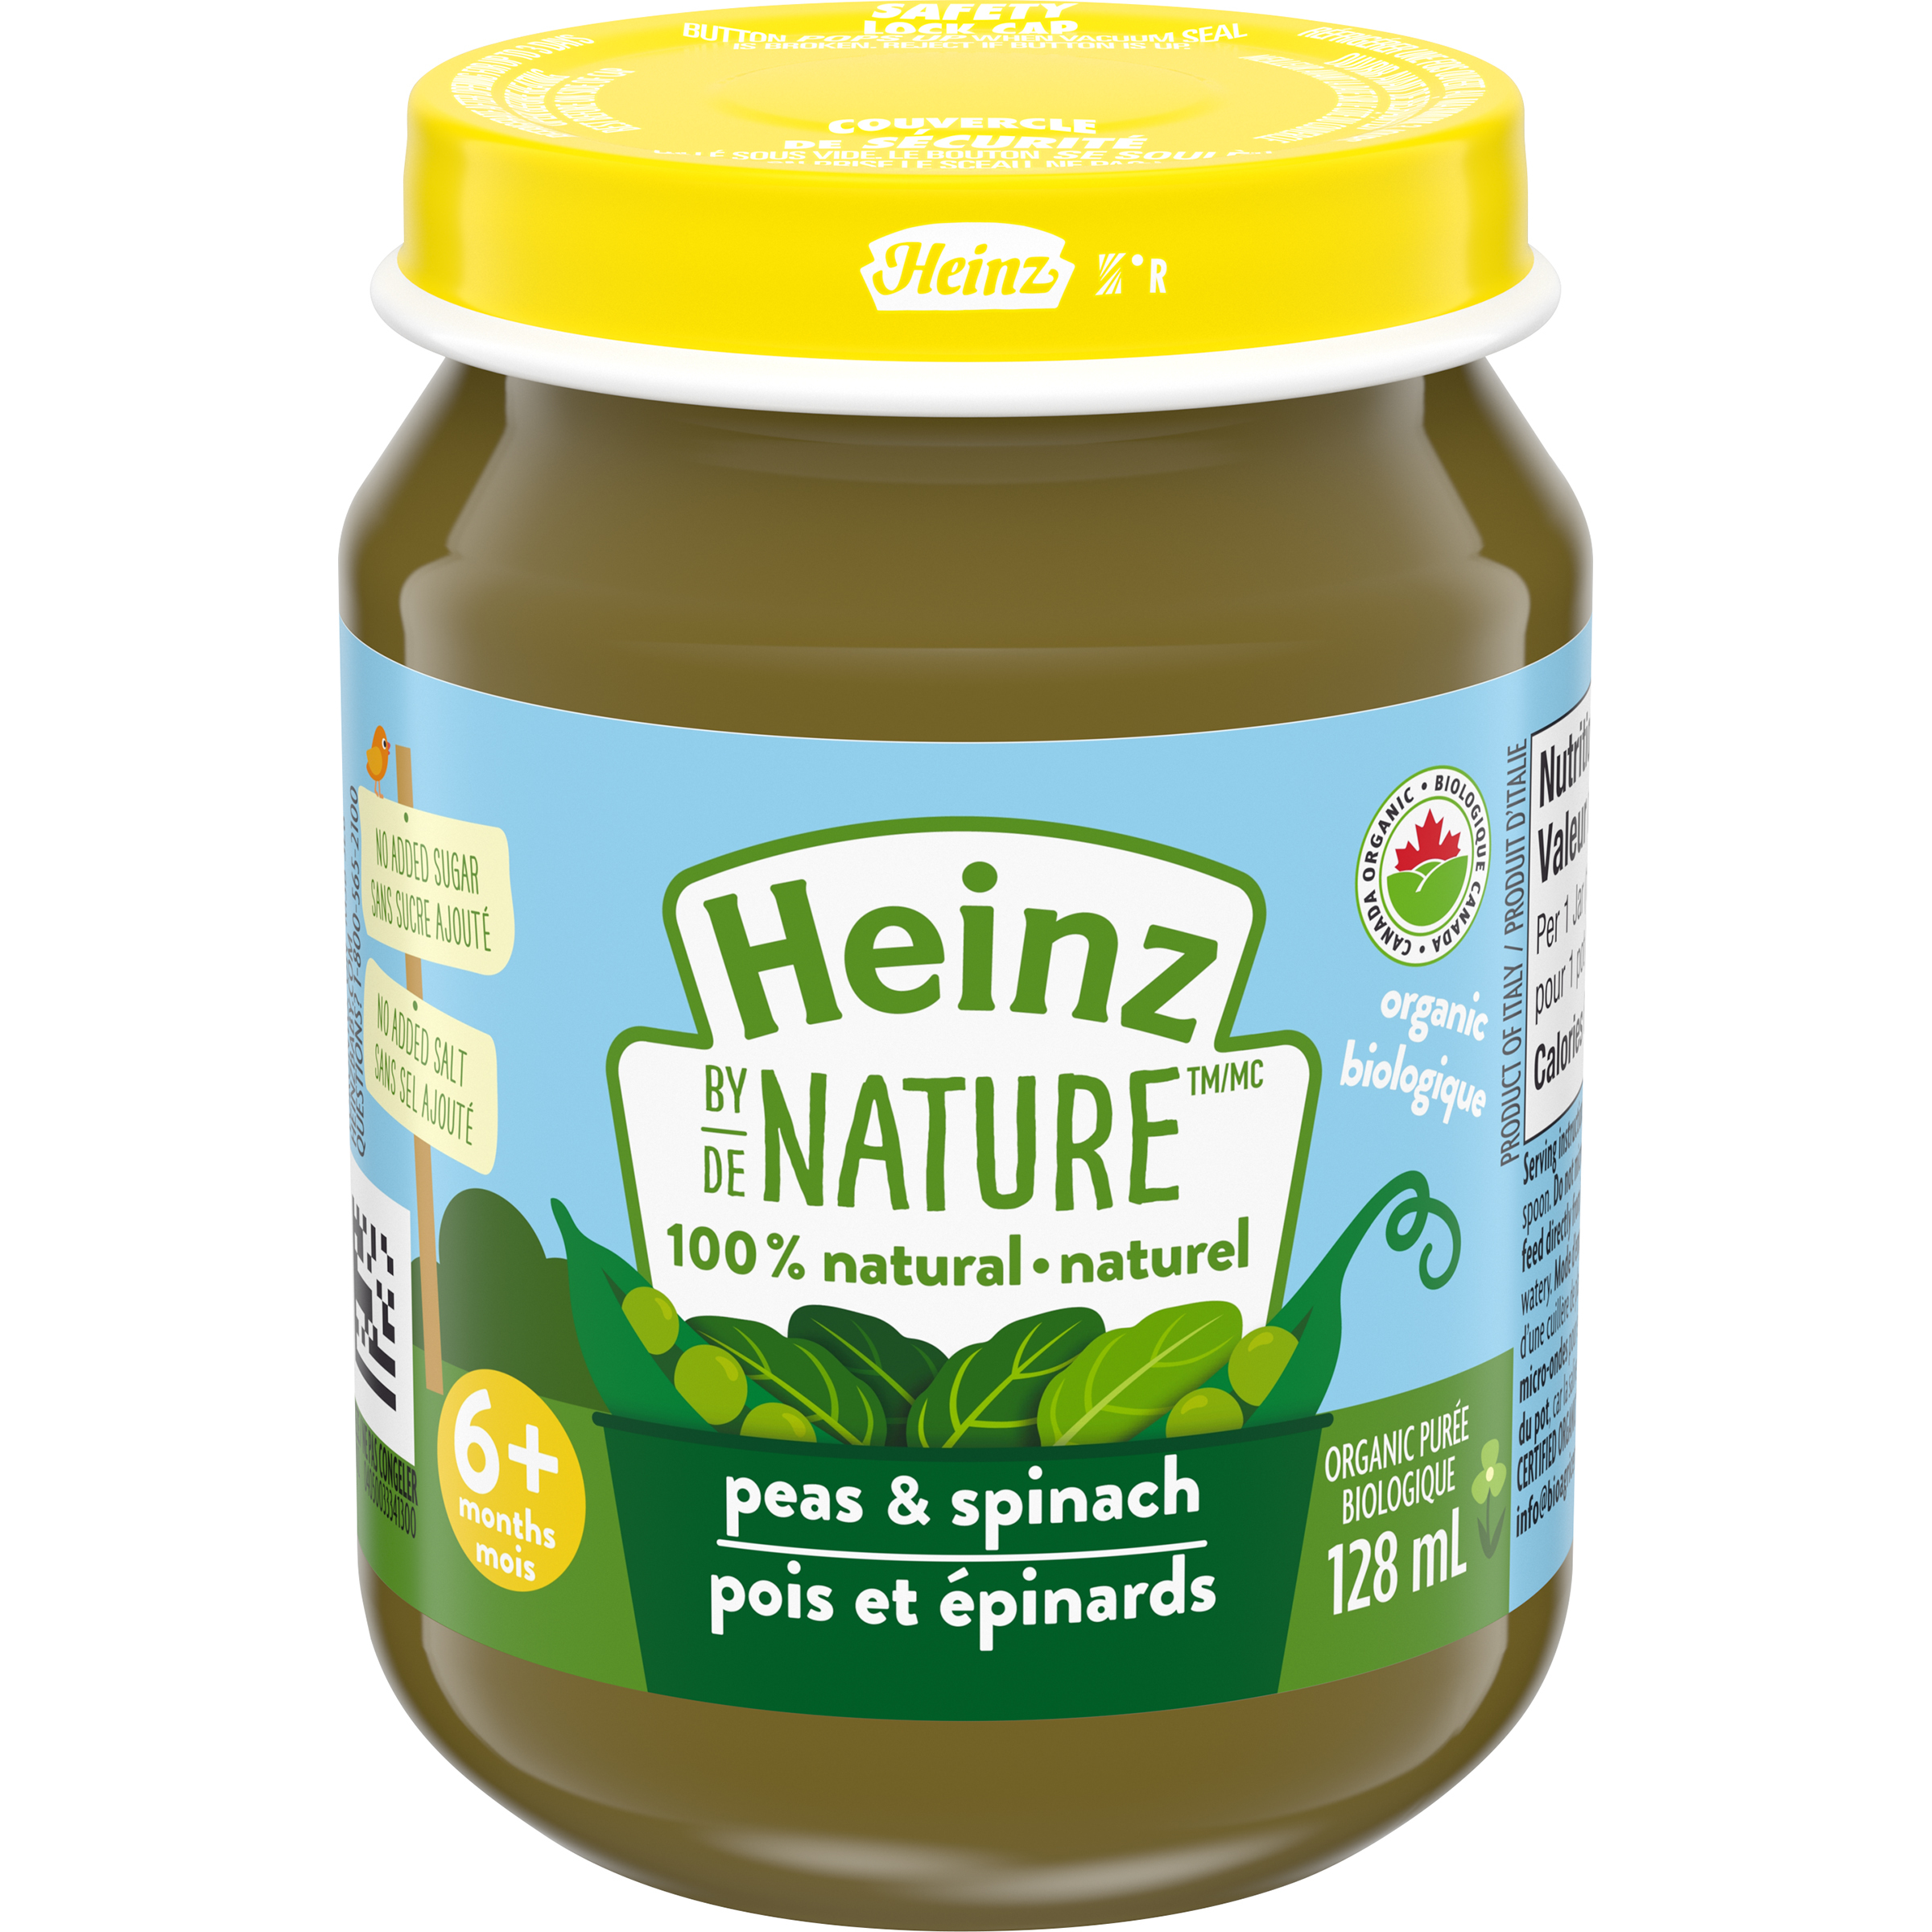 Heinz by Nature 100% Natural Baby Food - Organic Peas & Spinach Purée